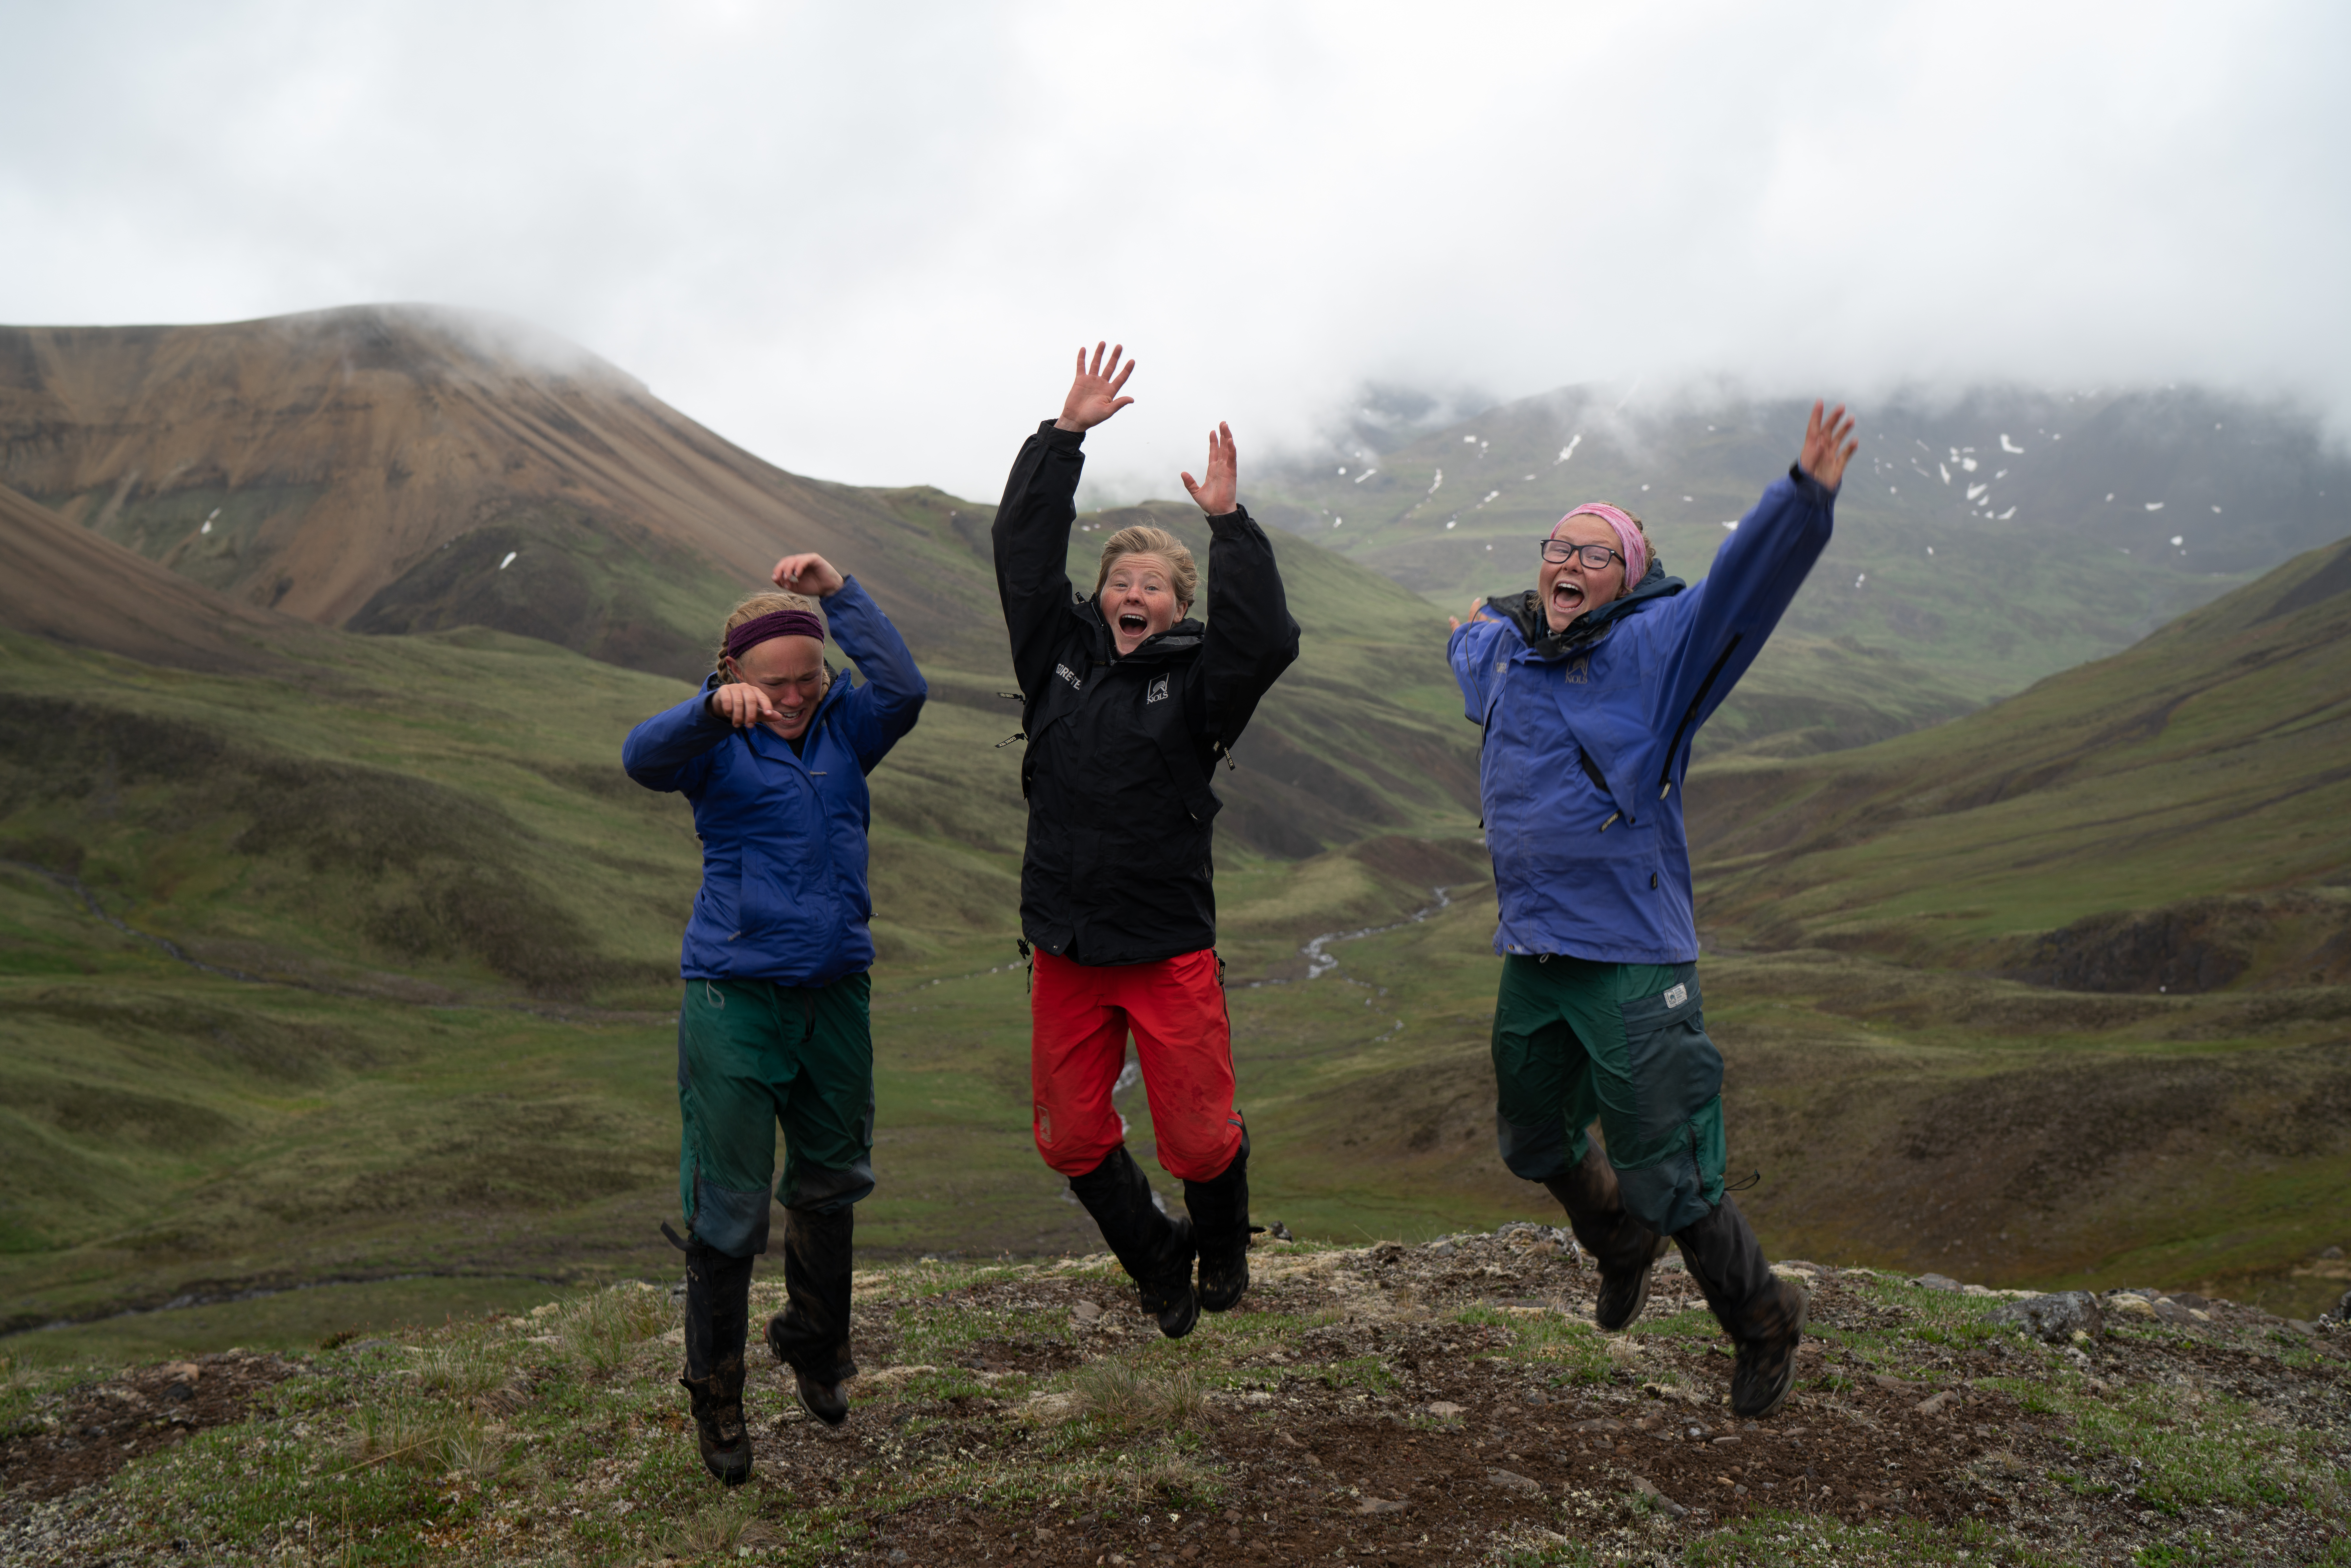 Students jump in air in the the Alaskan mountains